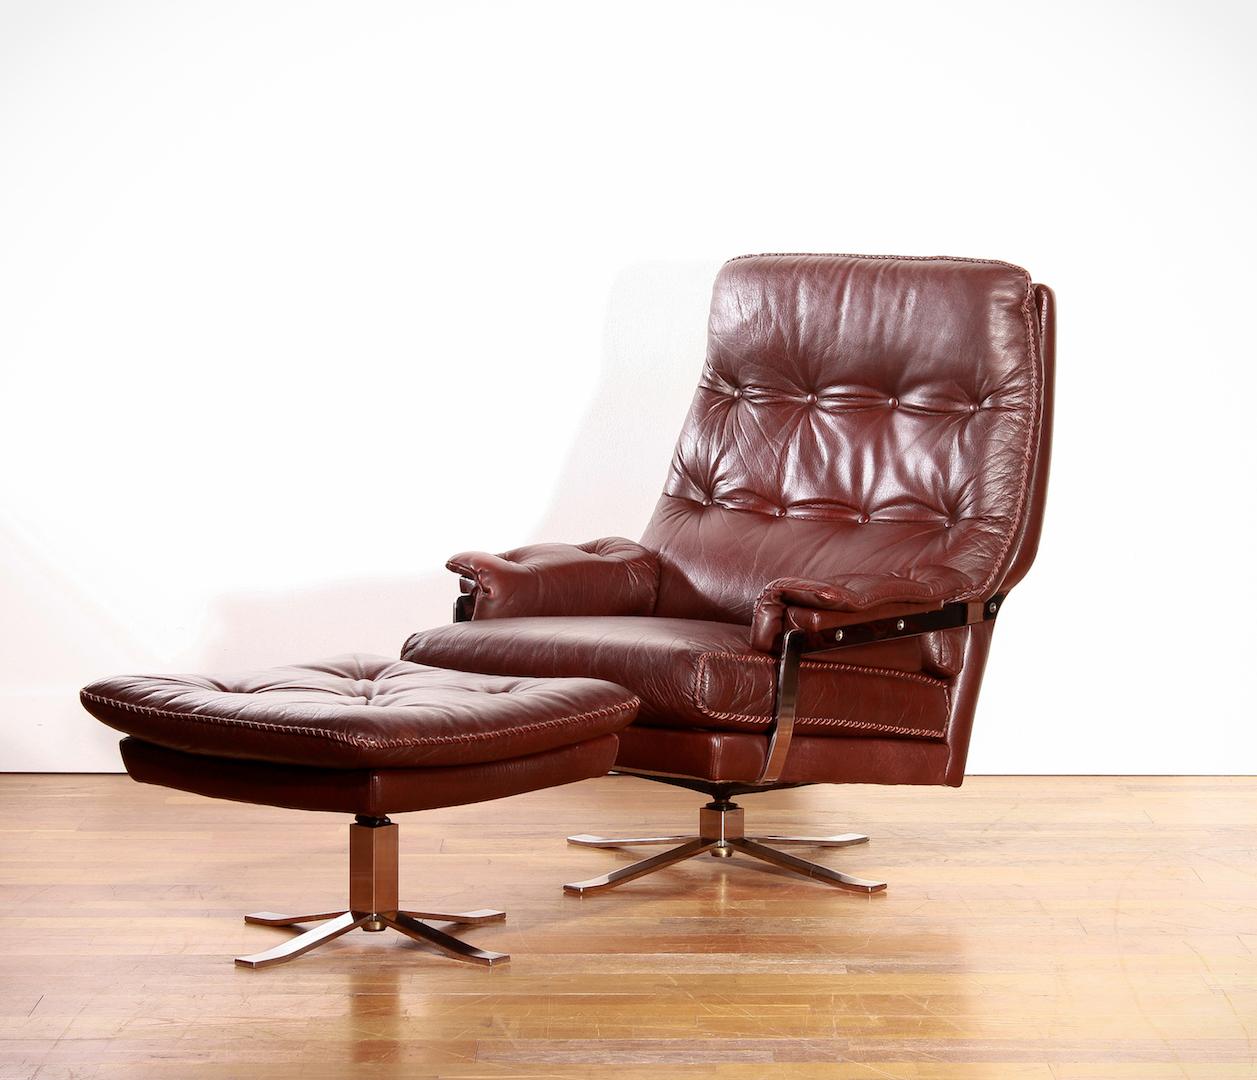 Beautiful high-quality leather lounge chair and ottoman designed by Arne Norell and produced by Vatne Møbler.
The leather is hand-stitched and in excellent condition.
Period 1960s.
 